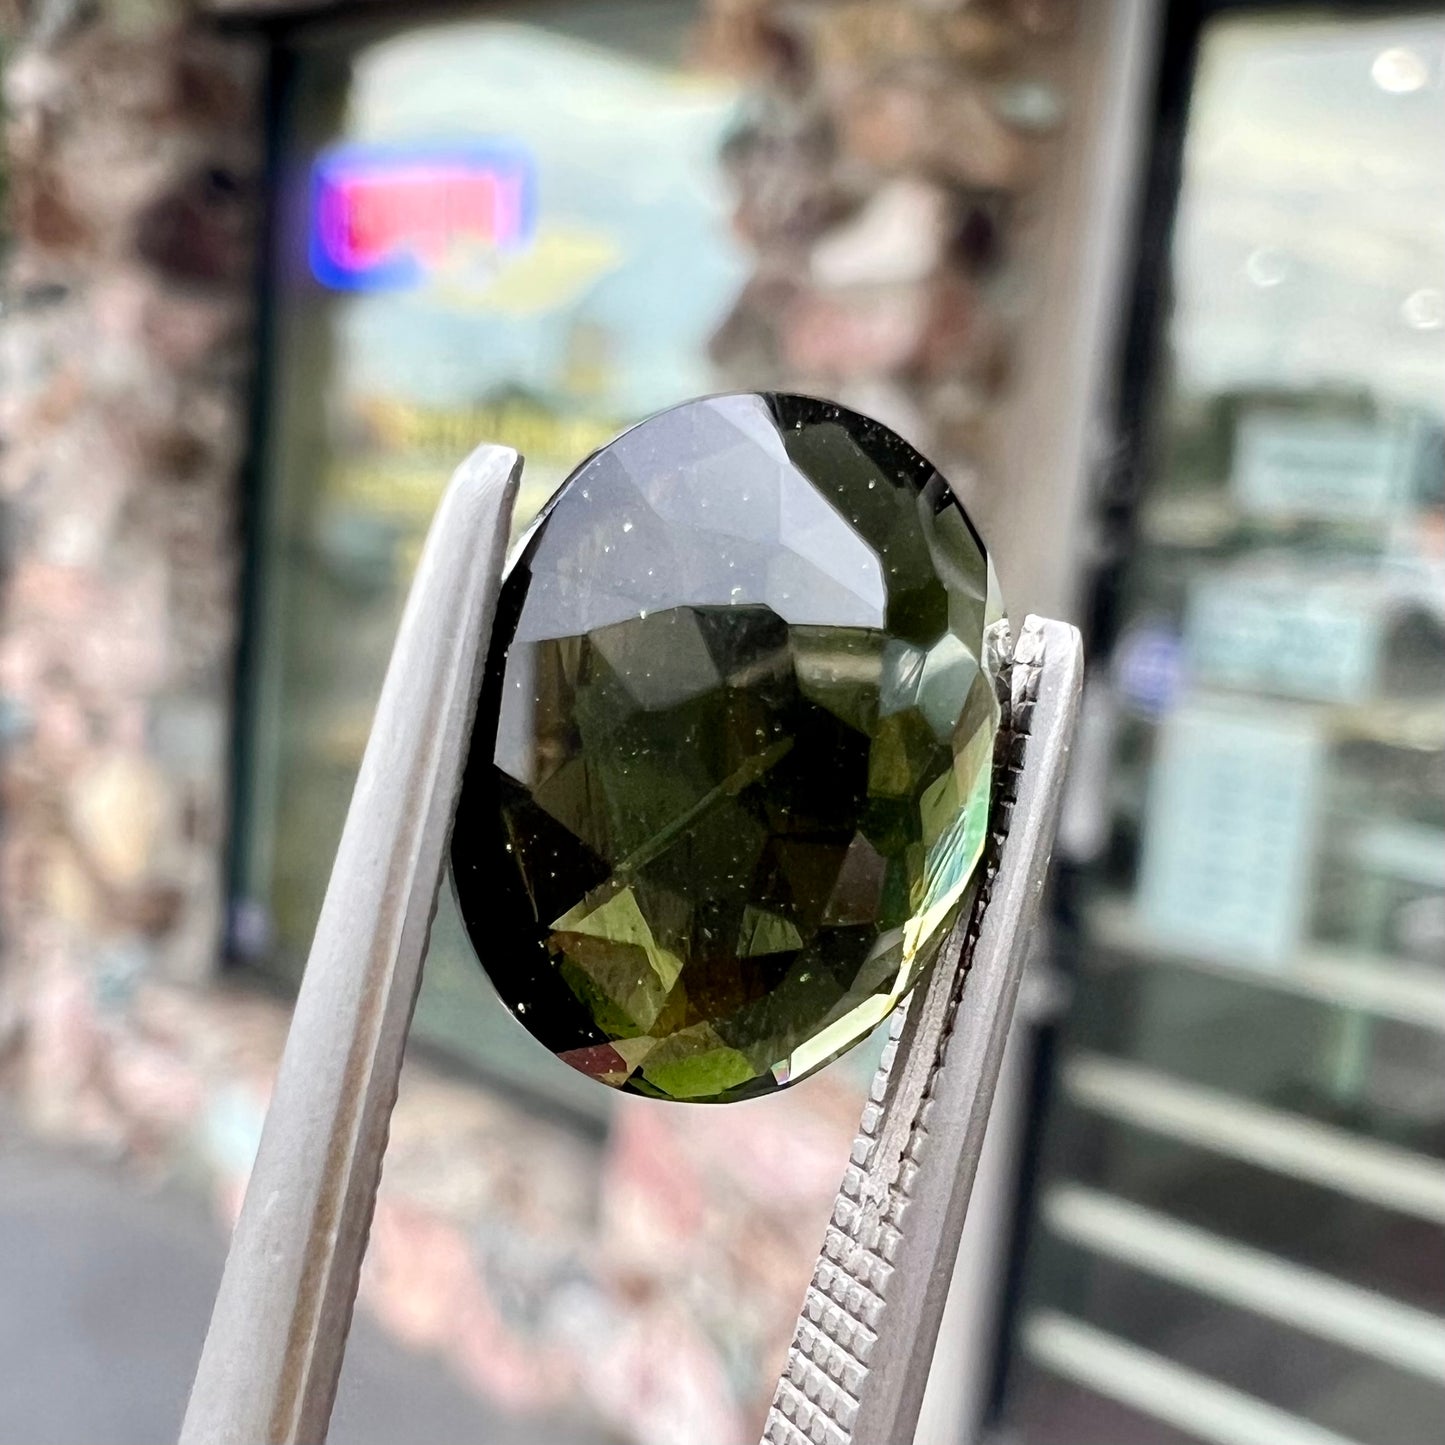 A loose, oval checkerboard cut natural moldavite gemstone.  The stone is dark green color.